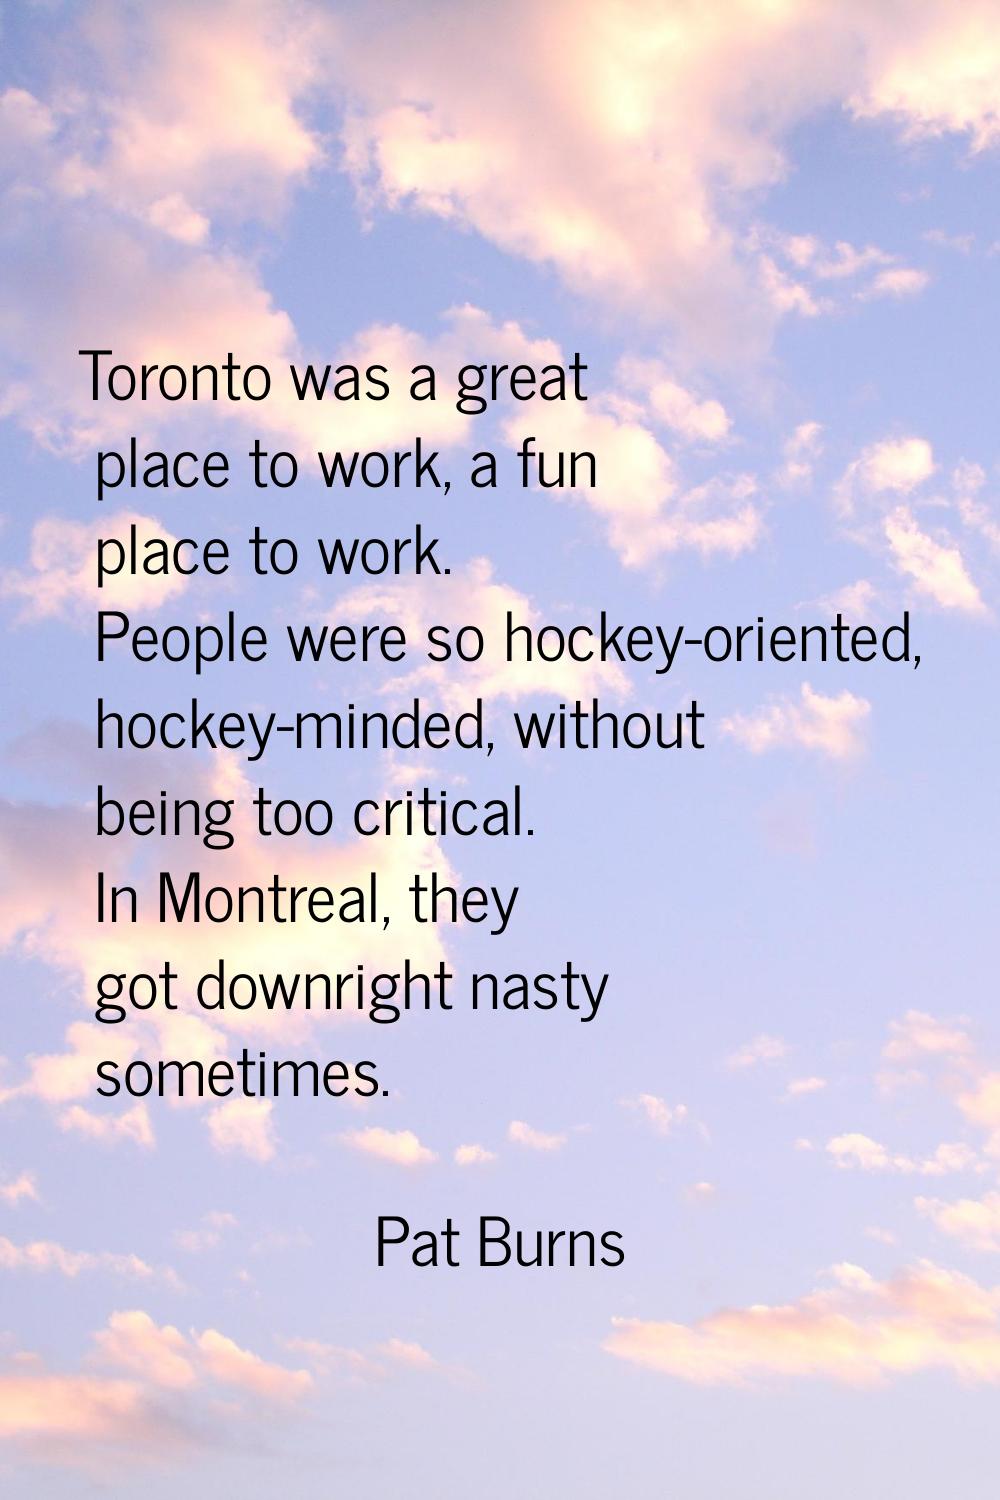 Toronto was a great place to work, a fun place to work. People were so hockey-oriented, hockey-mind